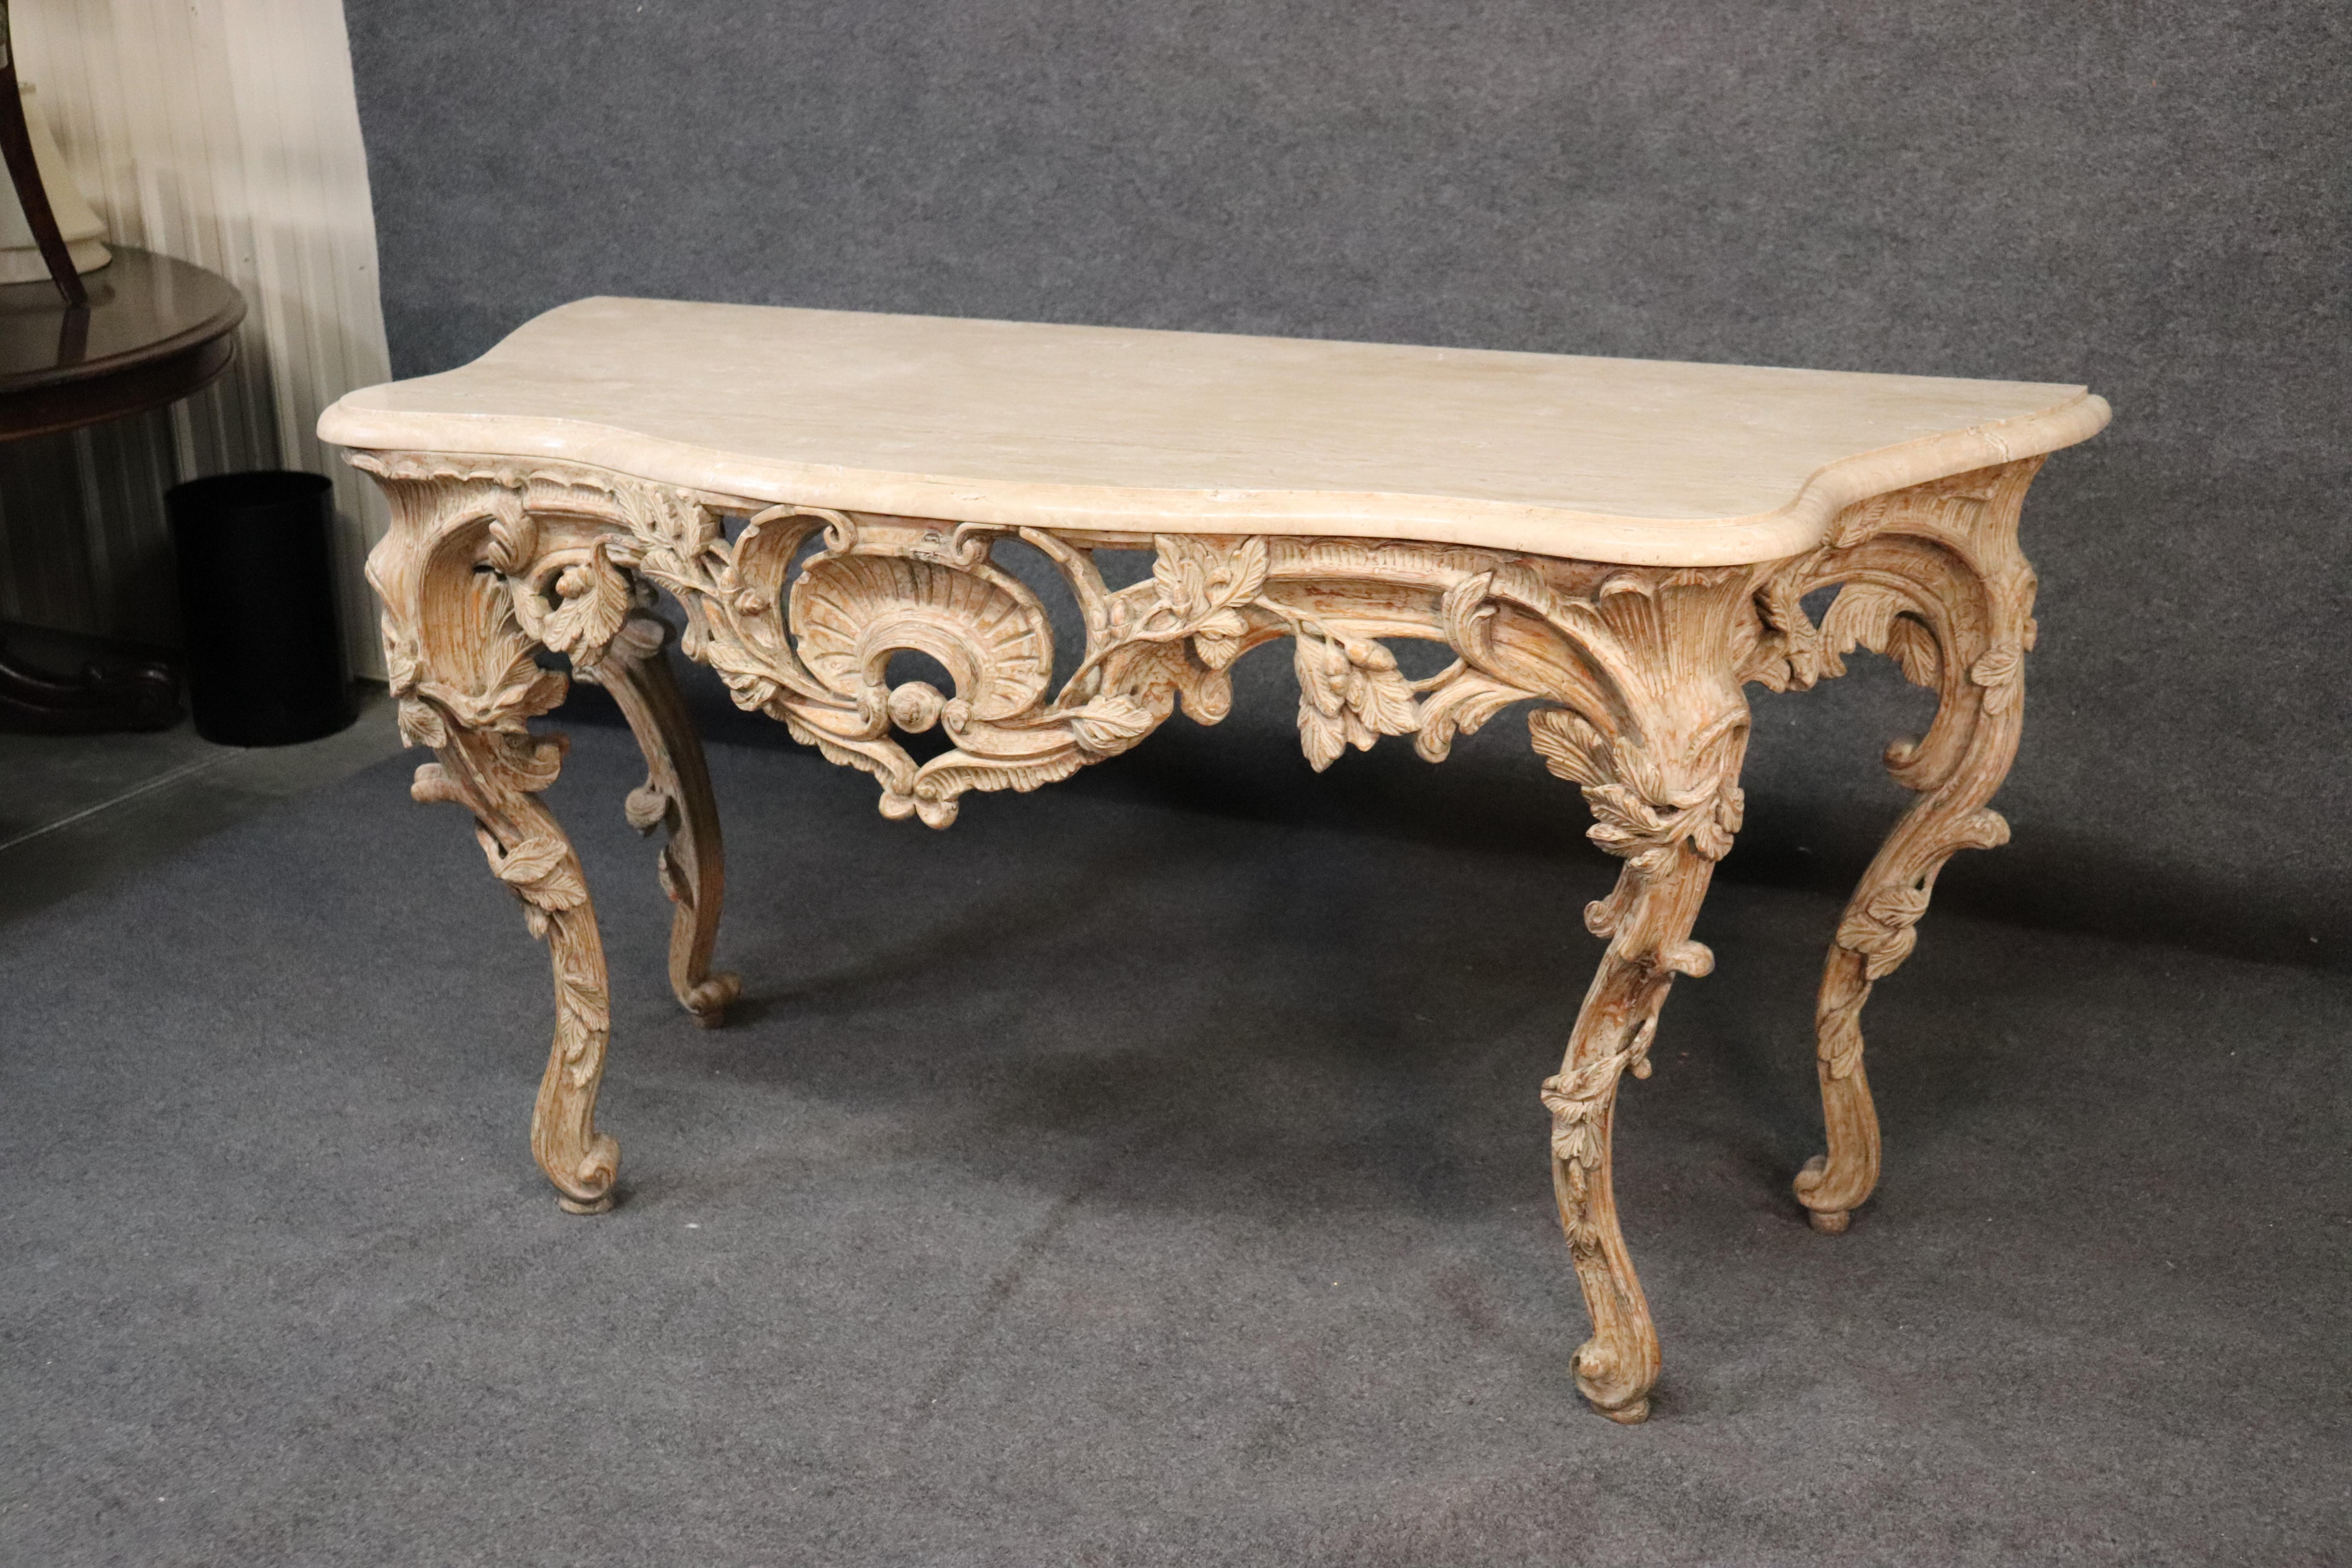 This beautiful limed finished console table has a gorgeous carved base and a beautiful white limed finish. The carving is exceptional and the travertine marble top is in excellent condition. The table measures 66 wide x 28 deep c 34 tall and dates